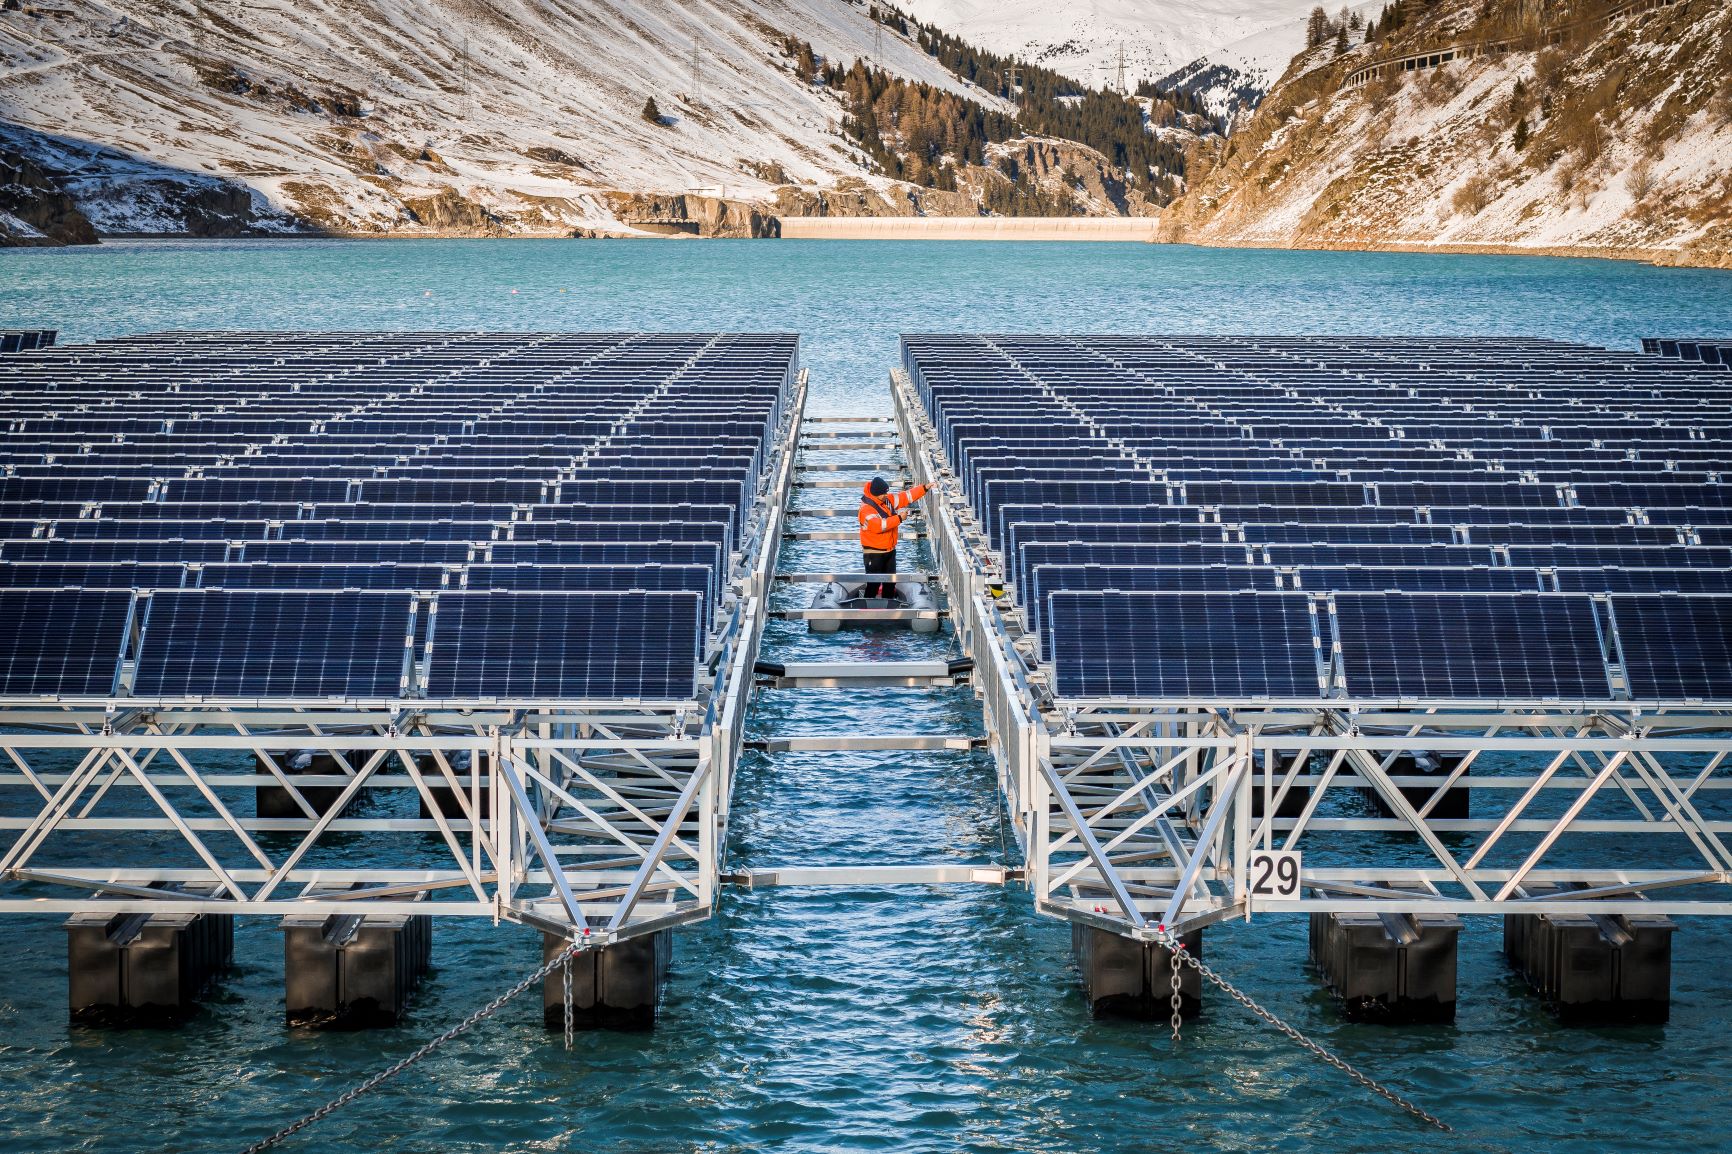 The Lac des Toules solar power plant does not pose a threat to any aquatic ecosystems: the reservoir is drained every winter, with no time for flora and fauna to develop © Romande Energie